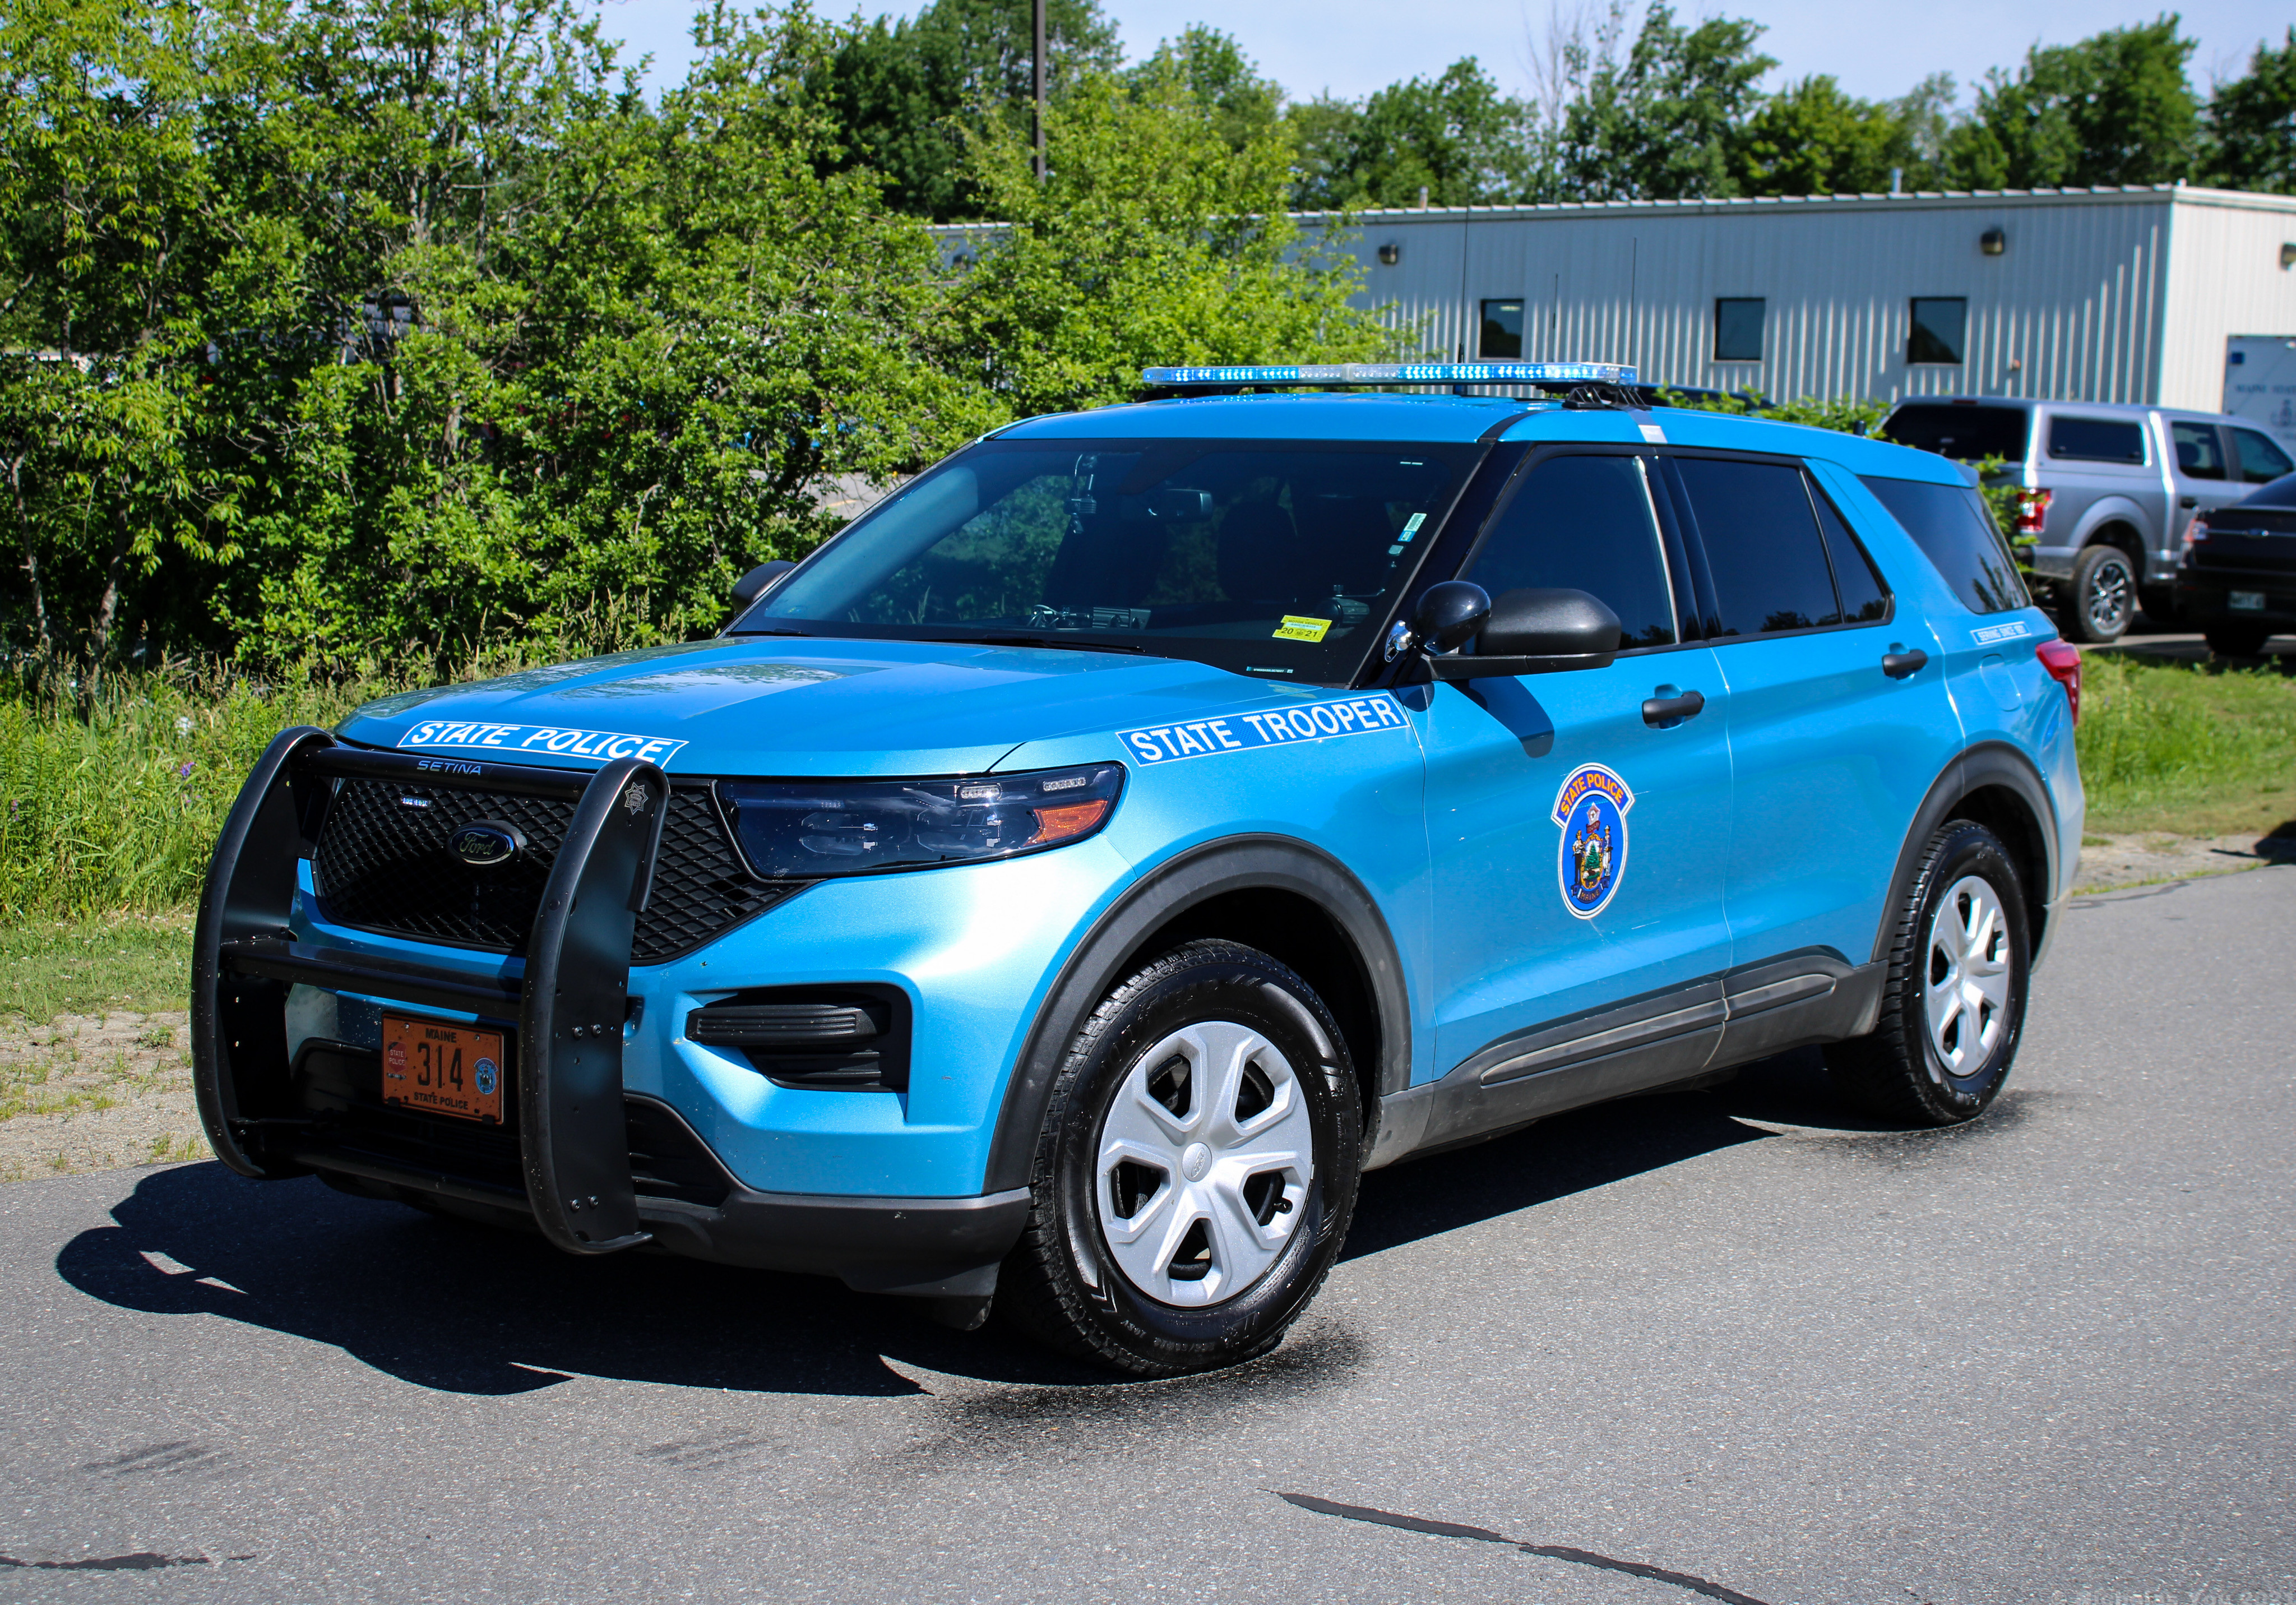 A photo  of Maine State Police
            Cruiser 314, a 2020-2021 Ford Police Interceptor Utility             taken by Nicholas You